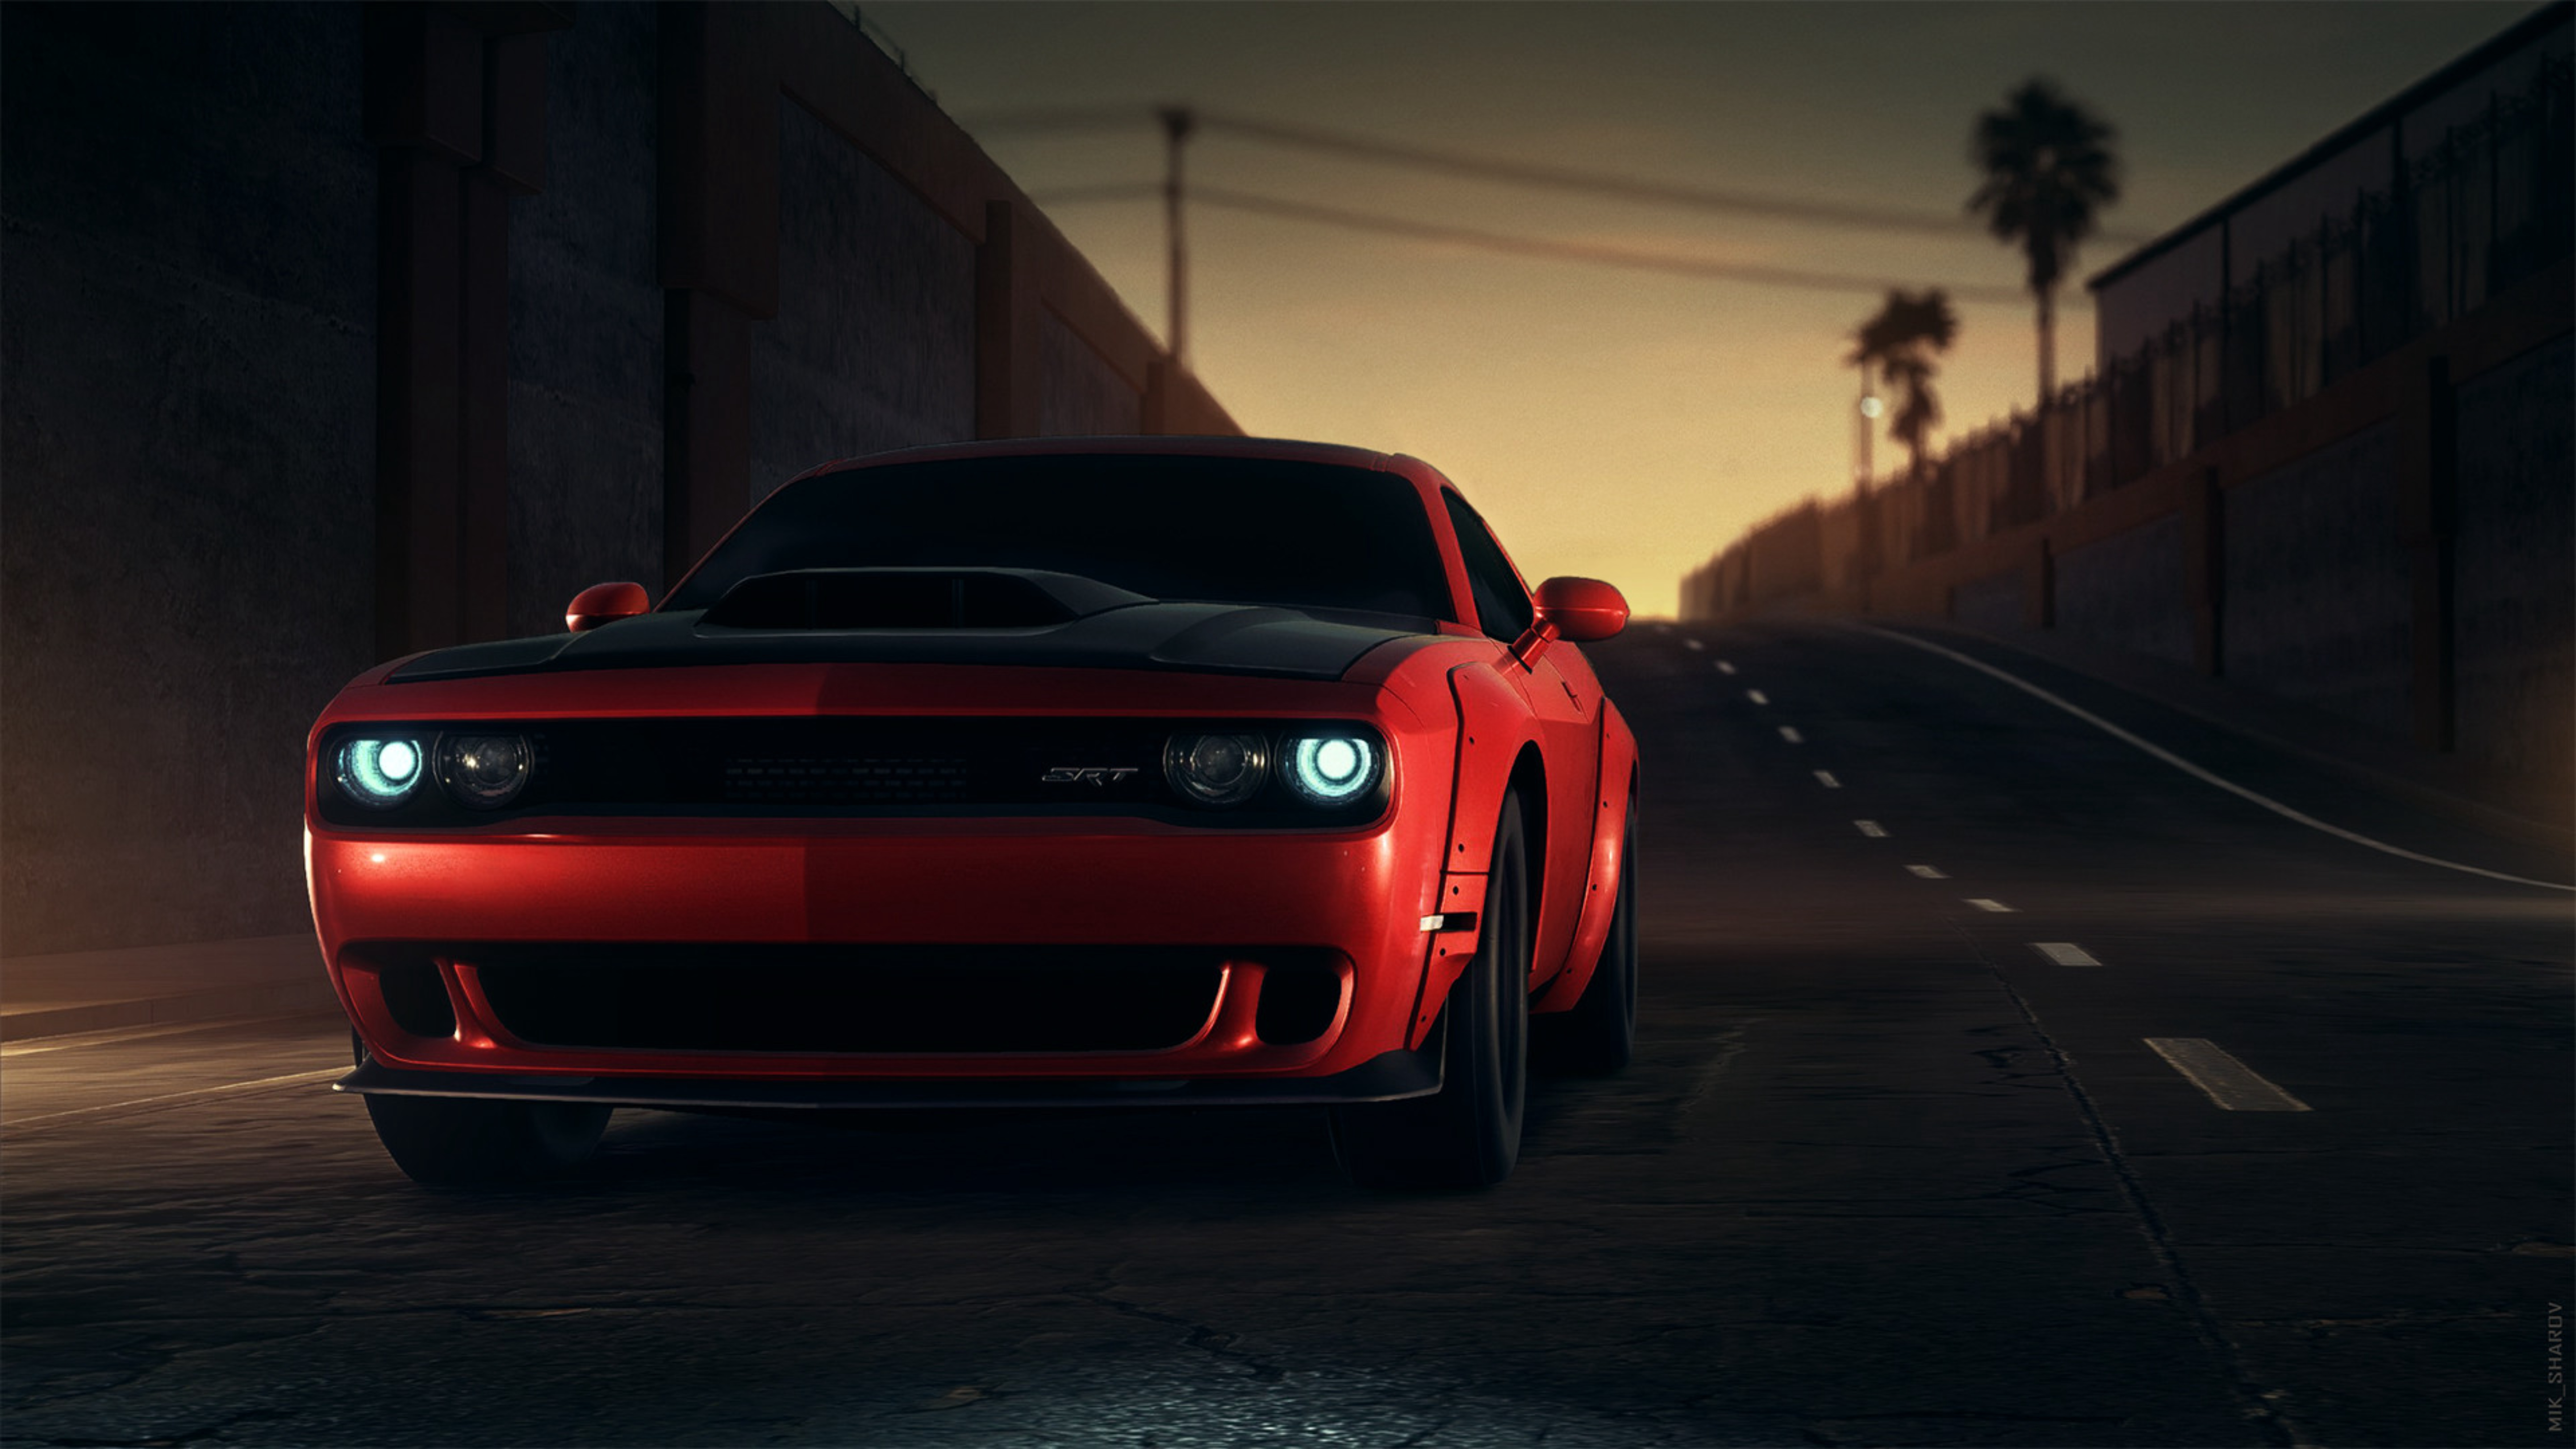 cars, sports car, front view, dodge srt, headlights, dodge, sports, red, lights High Definition image